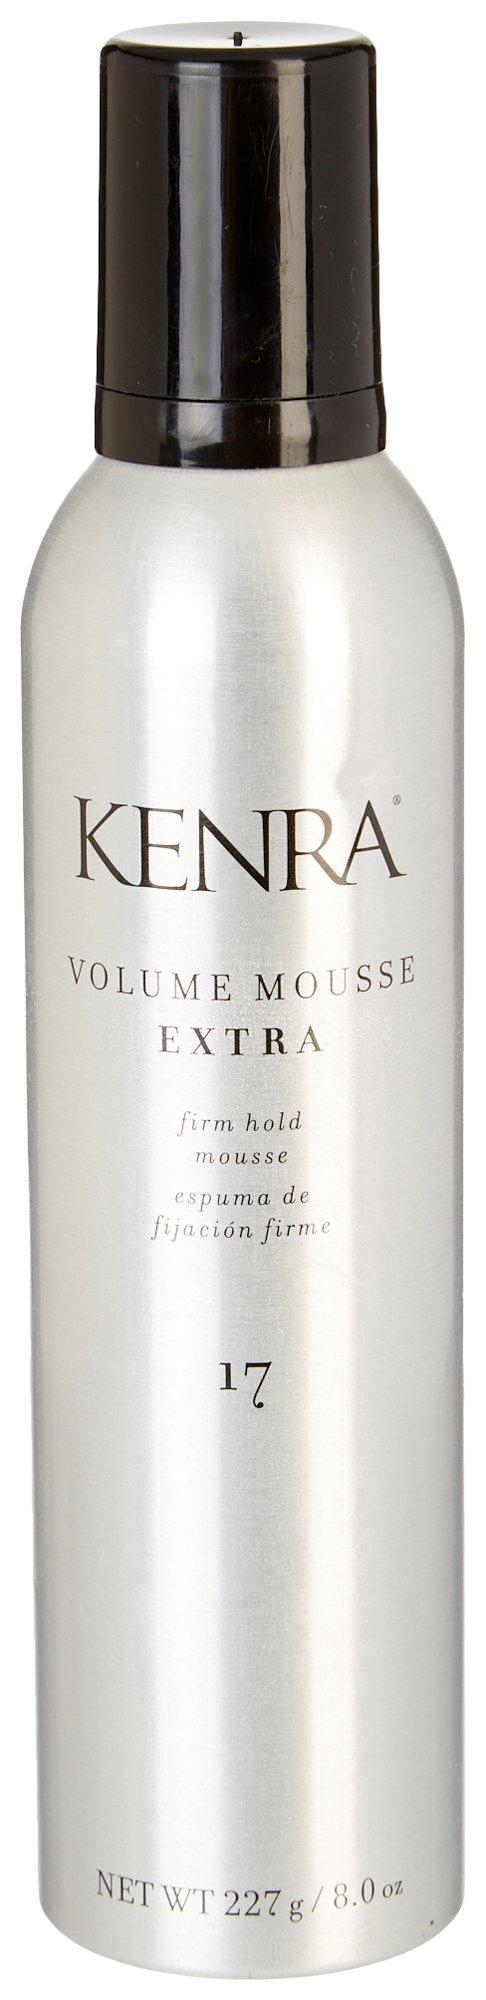 Kenra Firm Hold Extra Volume Mousse 17 8